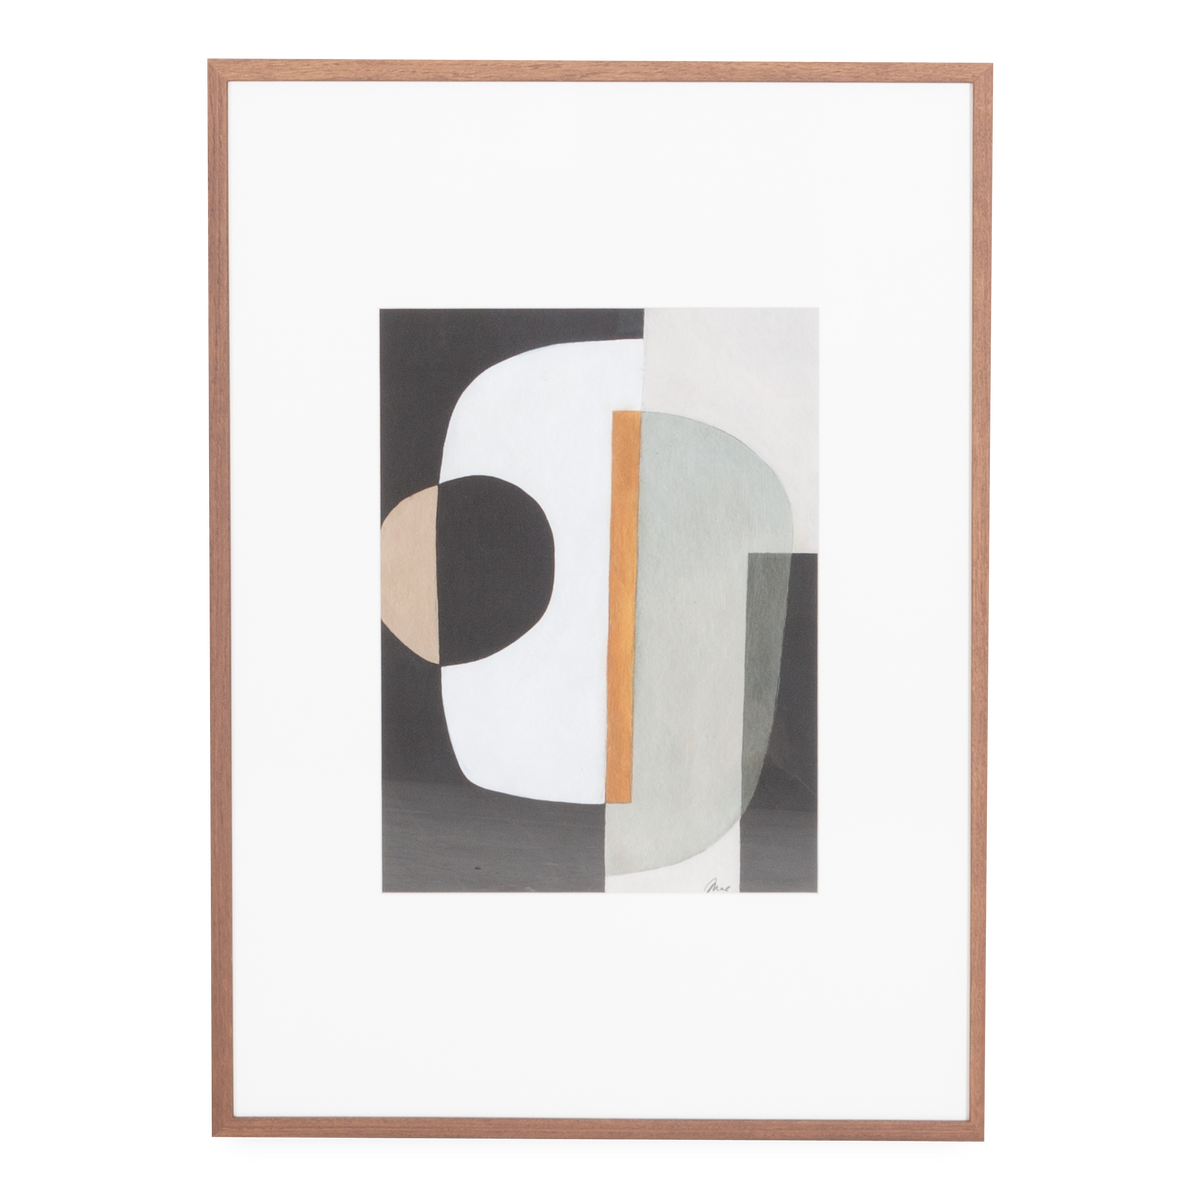 An exploration of abstract shapes and contrasting tones, The Voice Within 01 is characterized by its familiar shapes, pleasant asymmetry and its juxtaposition of colours.